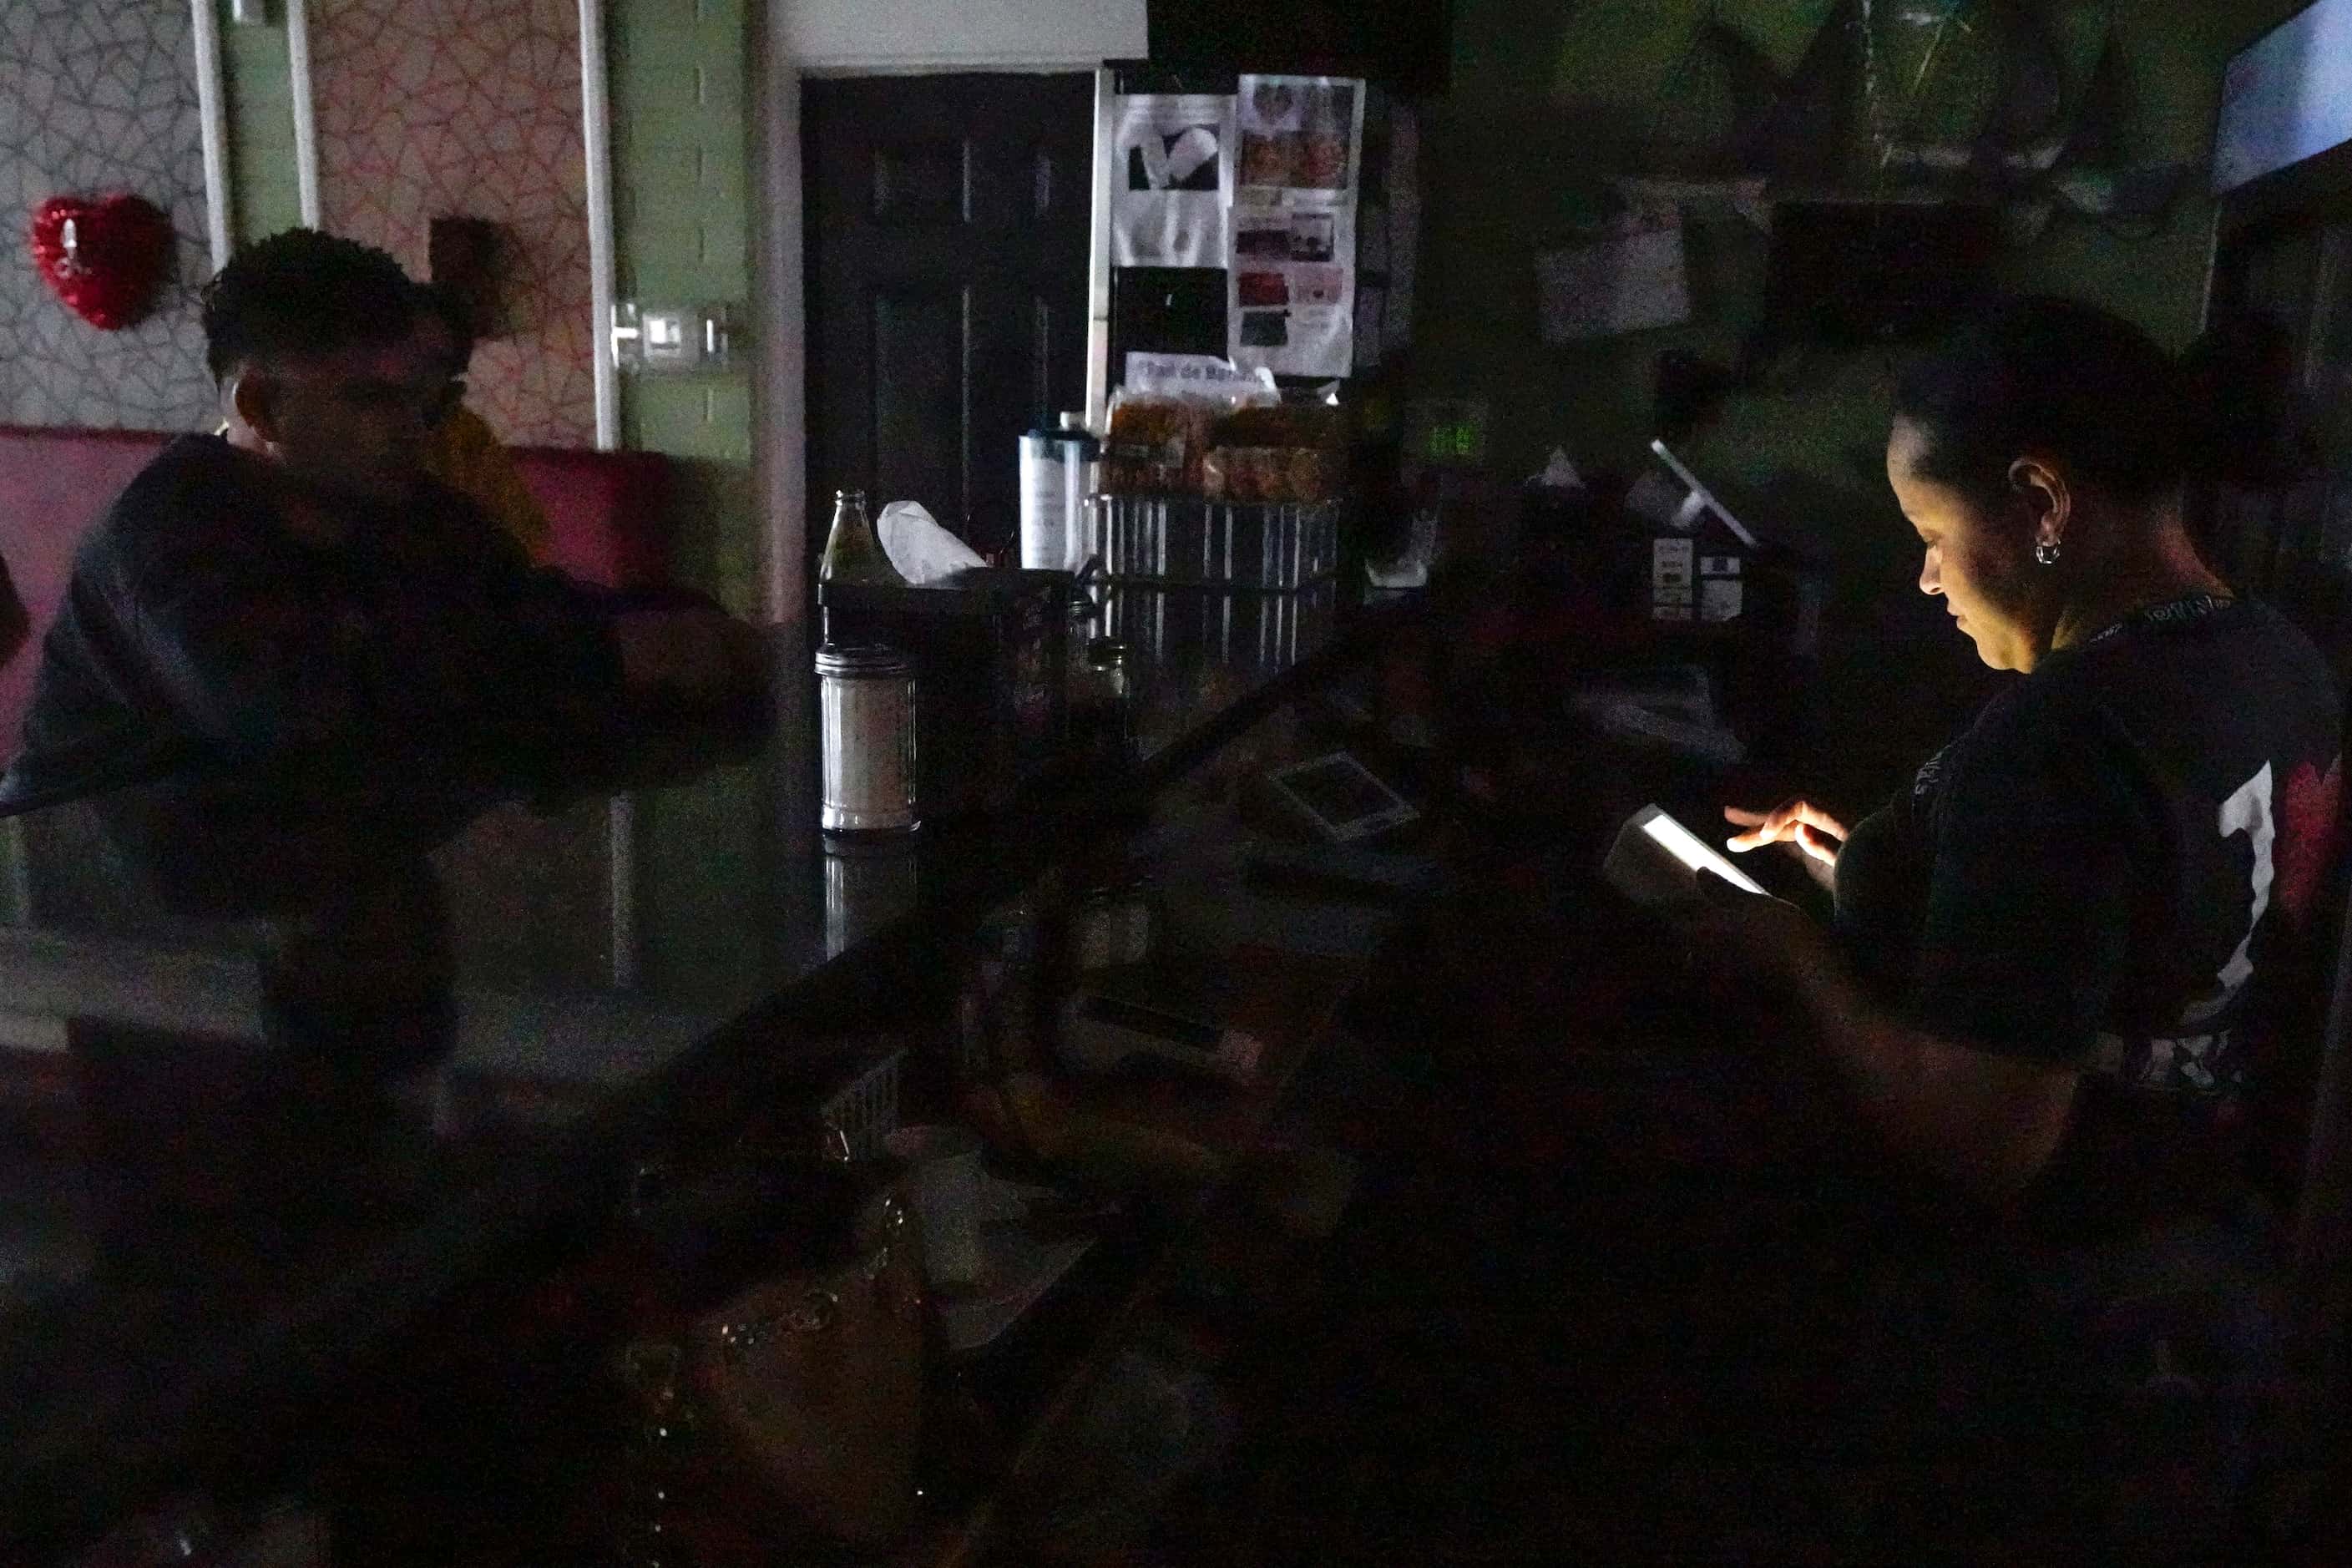 Ada Duarte takes to go orders using only the light of her phone after losing power at...